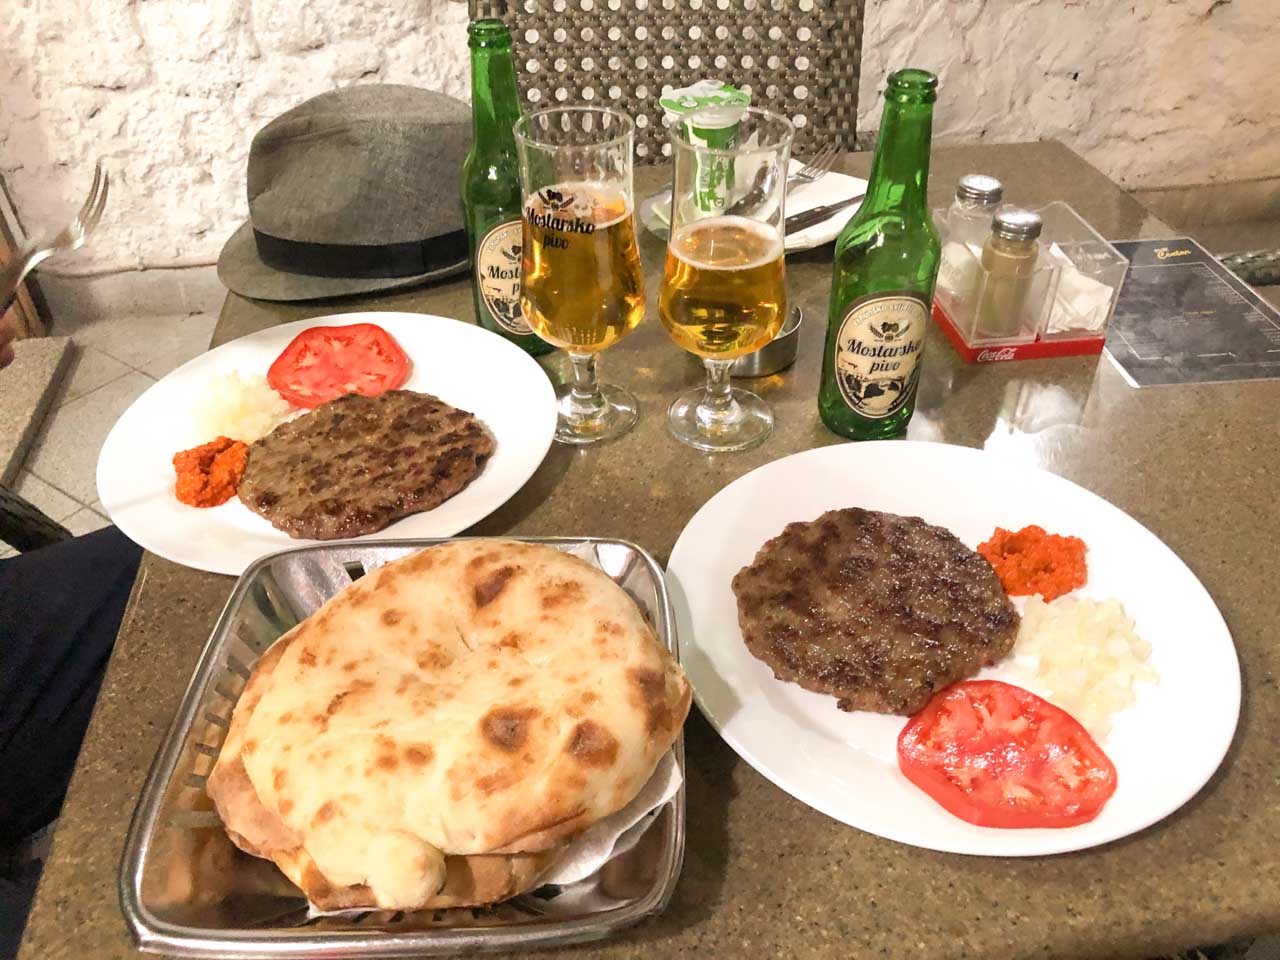 Two plates containing pljeskavica with sides next to pita bread and two glasses of beer on a table